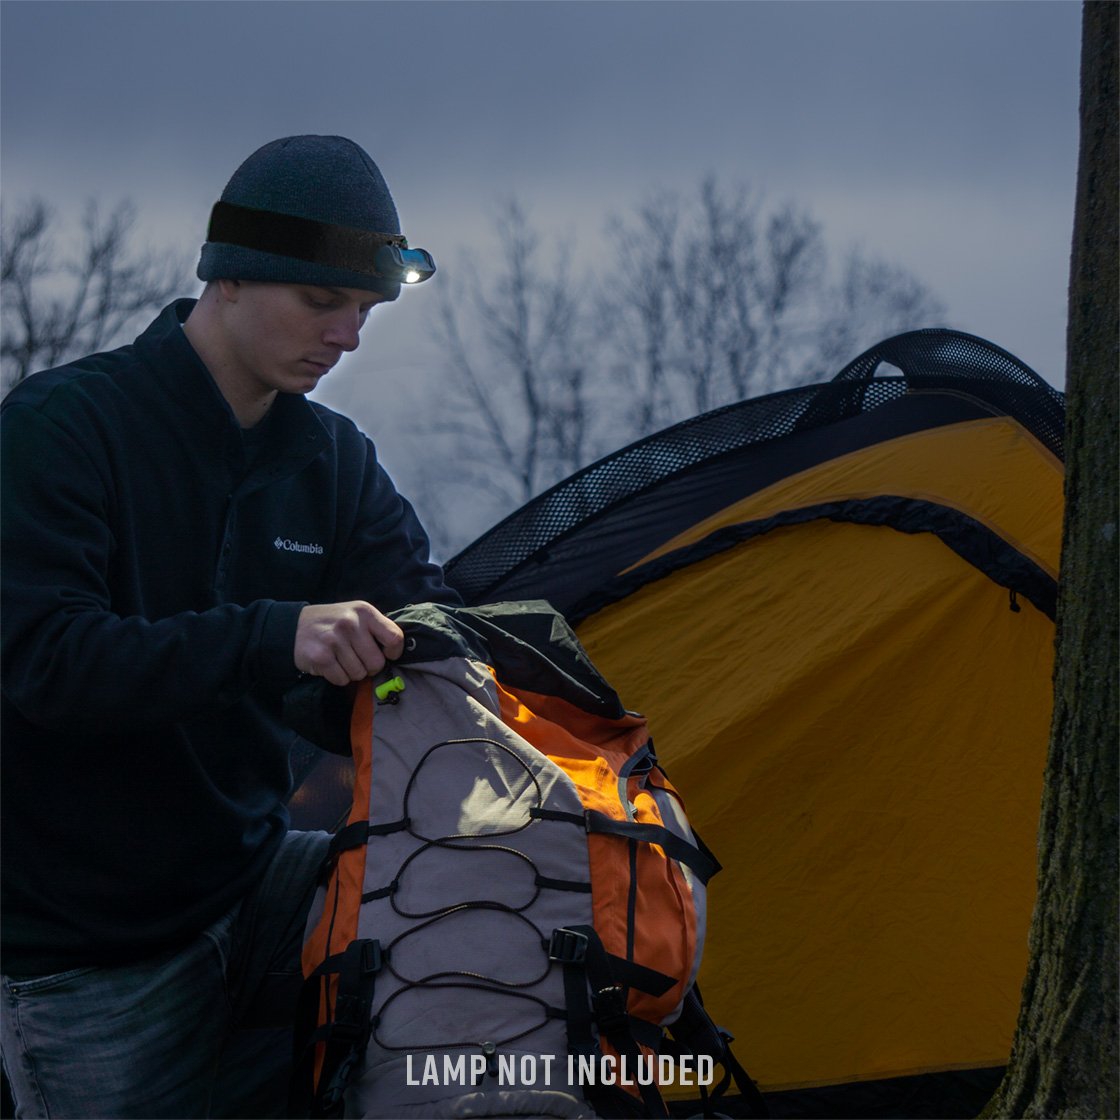 Man camping, and using Noxgear head light to look in bag. (Lamp not included in purchase of Head Strap)